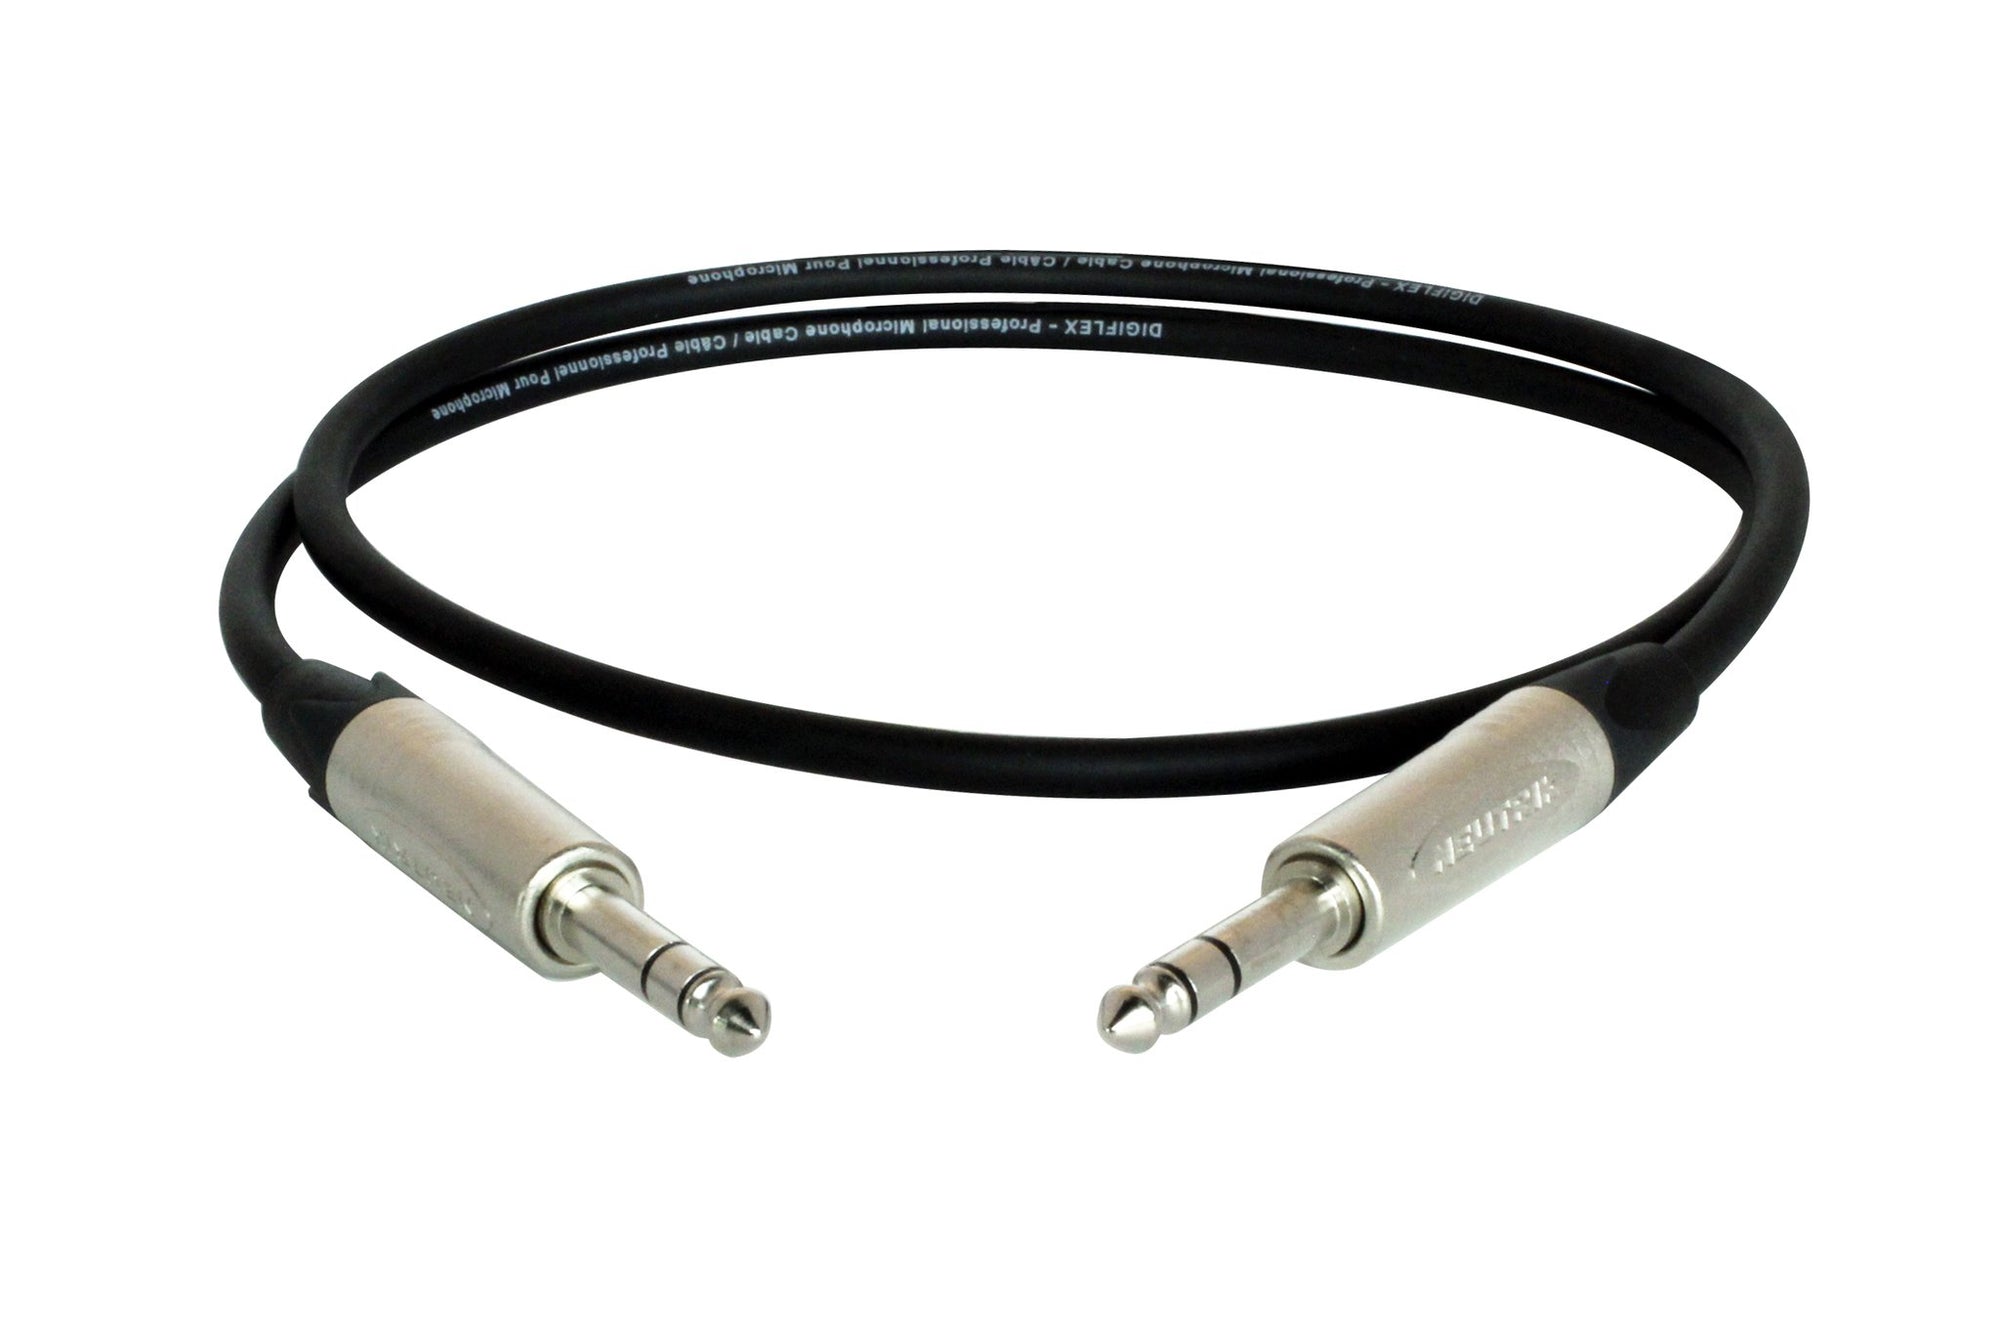 Digiflex NSS-6 6 Foot NK2/6 Patch Cable -Black/Gold TRS Connectors